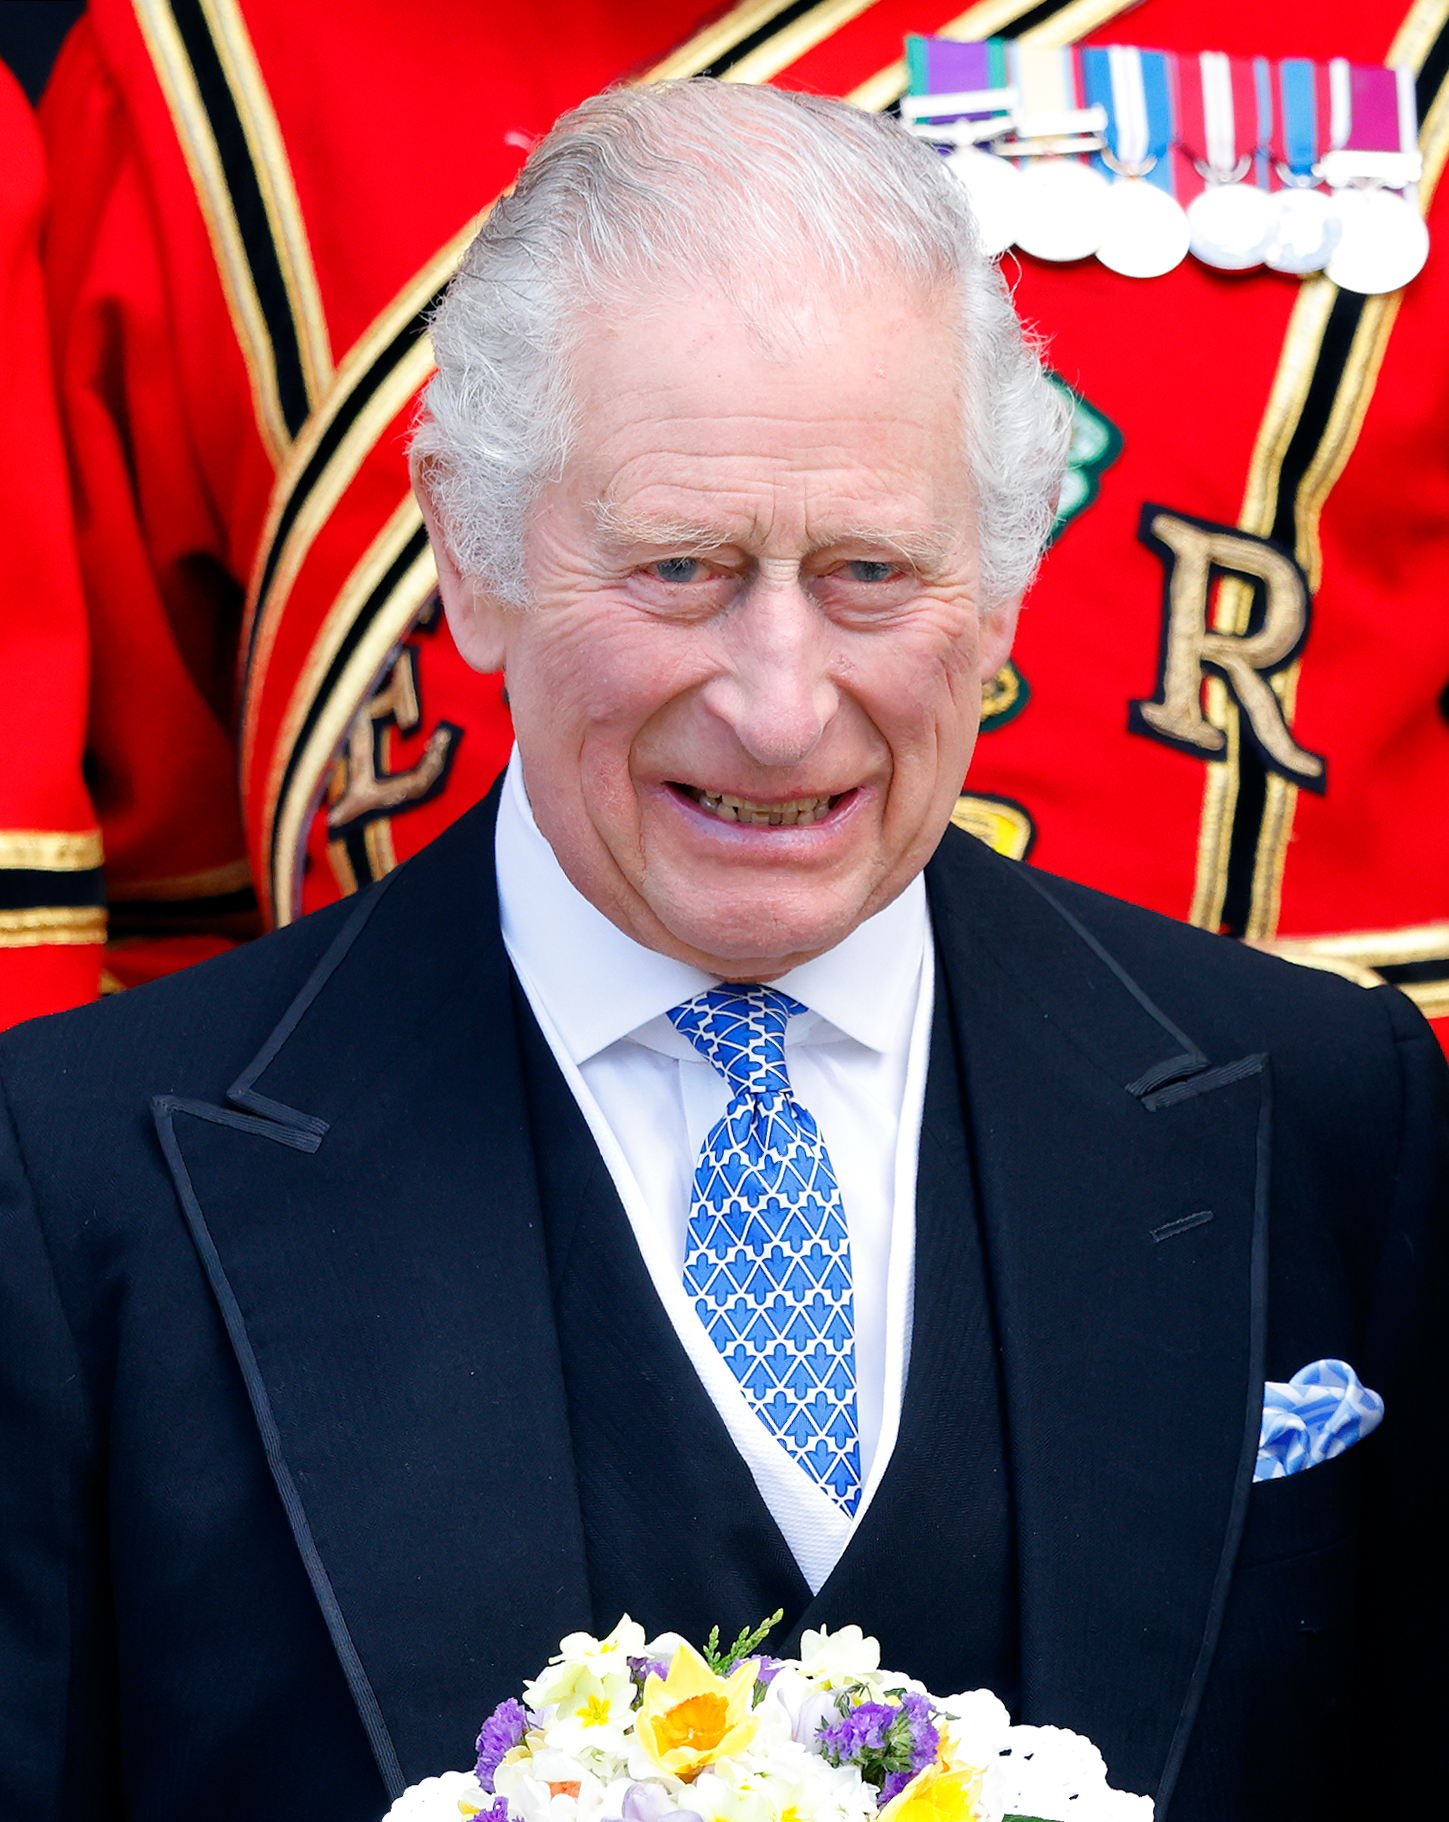 King Charles III attends the Royal Maundy Service at York Minster on April 6, 2023 in York, England. | Source: Getty Images